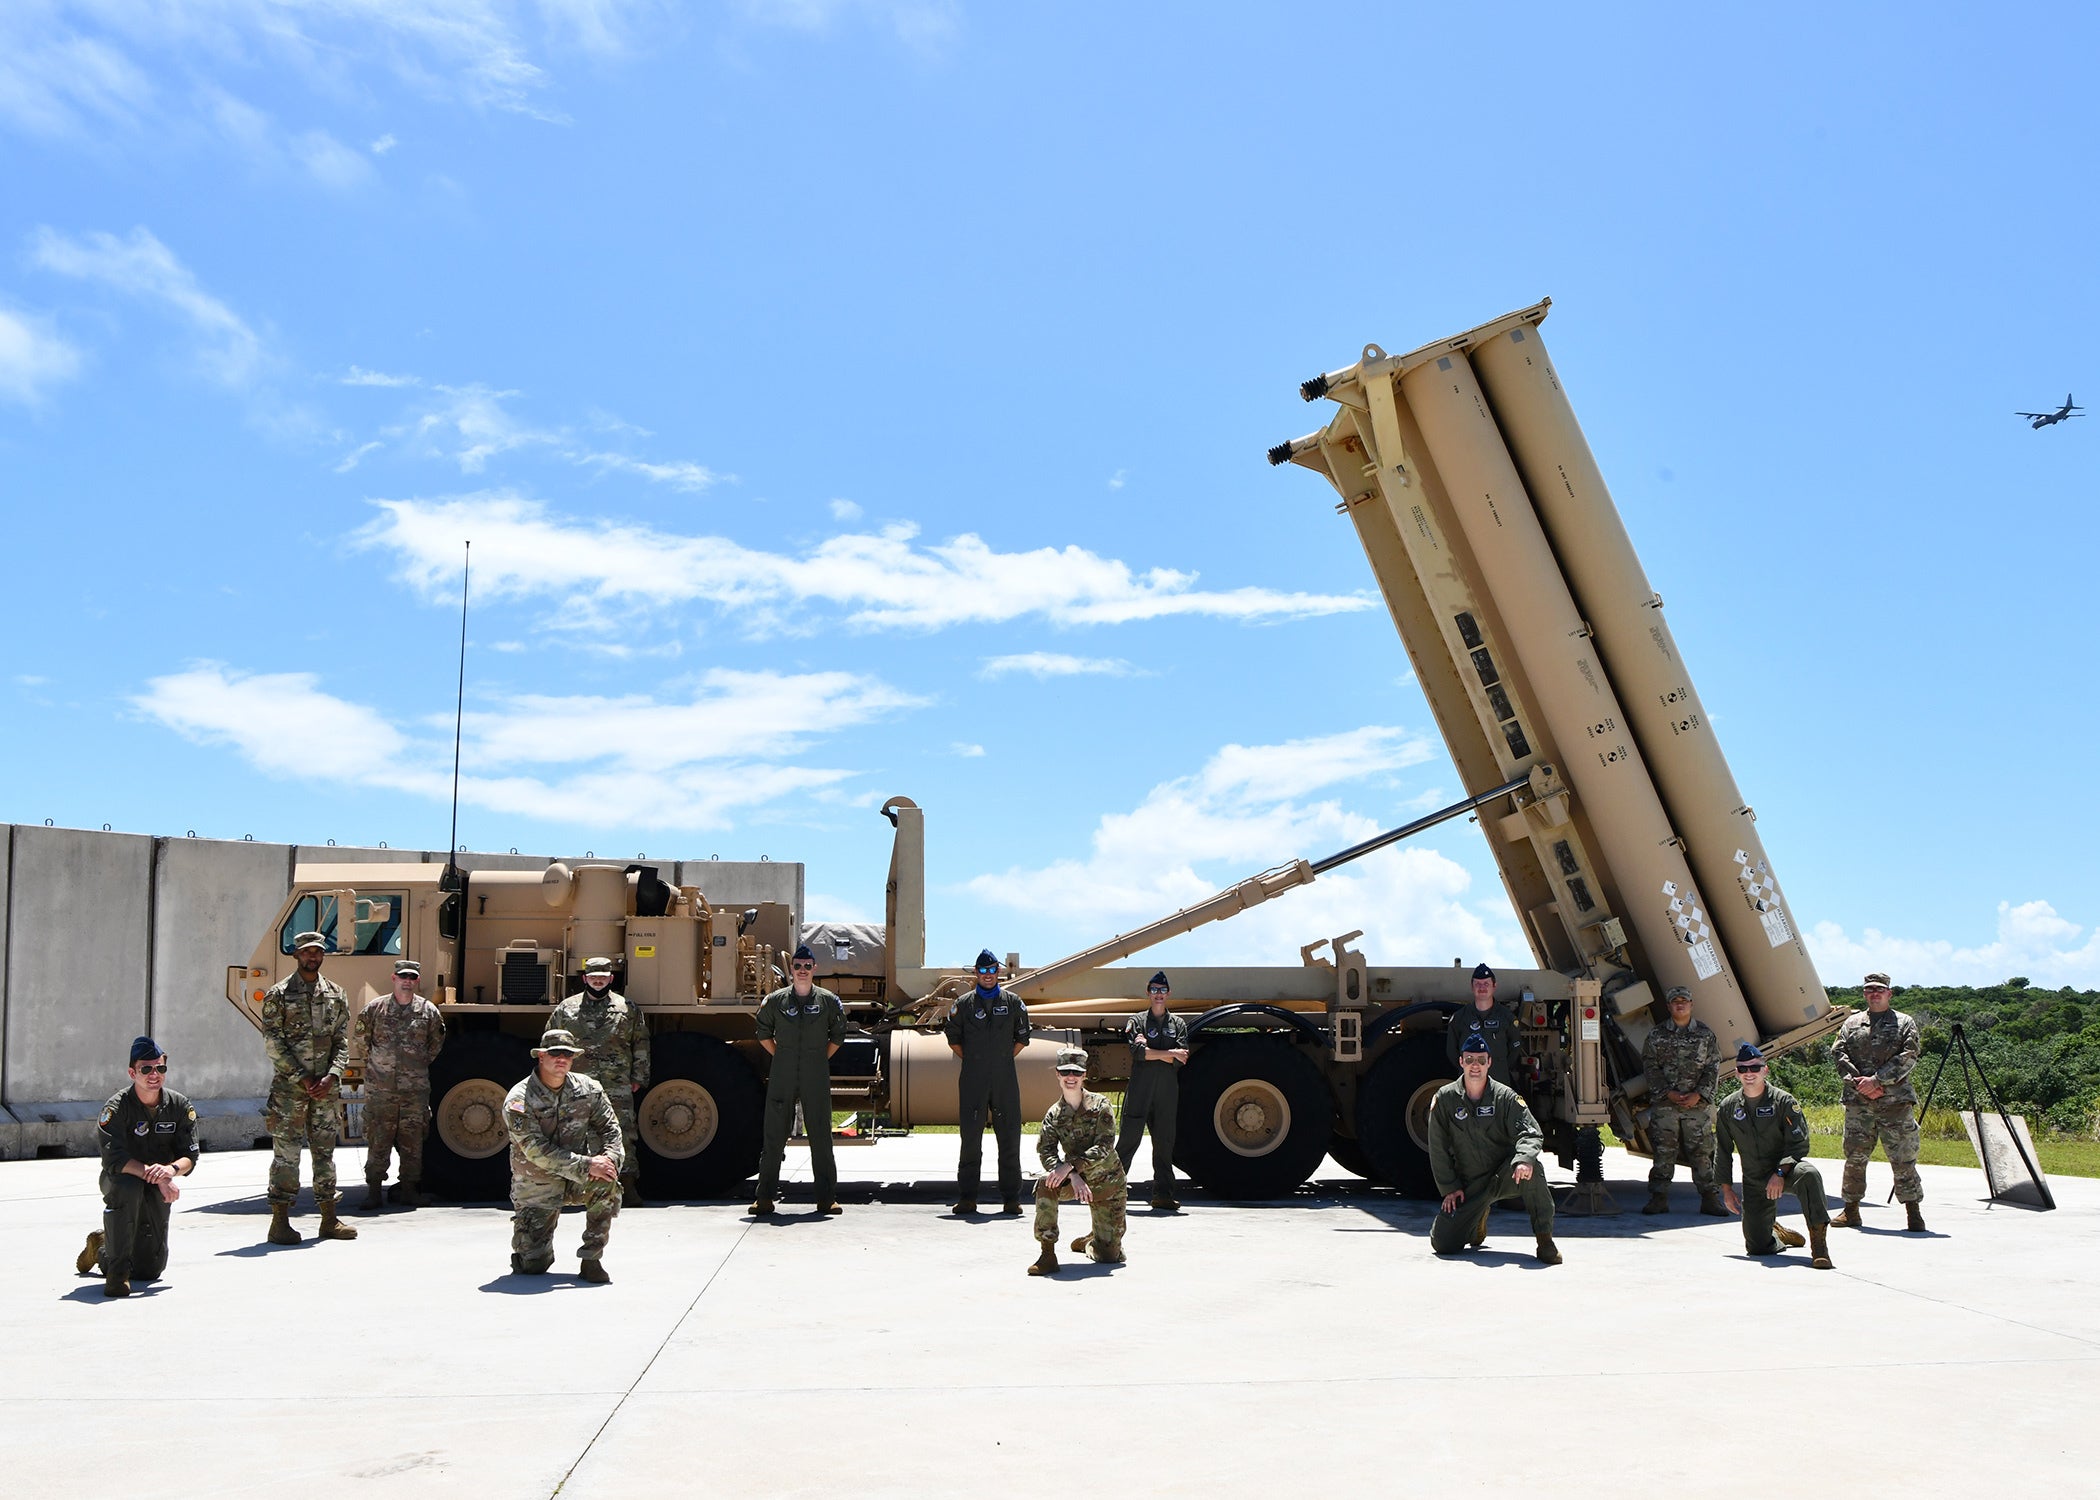 U.S. Army E3 Terminal High Altitude Area Defense soldiers and deployed Bomber Task Force U.S. Airmen, pose for a photo in front of a THAAD anti-ballistic missile defense system during a U.S. Army led tour on North West Field at Andersen Air Force Base, Guam, May 12, 2021. The THAAD mission is to protect the homeland, deployed military forces, friends, and allies from short, medium, and intermediate range ballistic missiles. The BTF was deployed to the U.S. Indo-Pacific Command area of responsibility to meet Pacific Air Forces training objectives. PACAF in coordination with other components, allies, and partners, provides USINDOPACOM with continuous unrivaled air, space, and cyberspace capabilities to ensure regional stability and security. (U.S. Air Force photo by Master Sgt. Louis Vega Jr.)